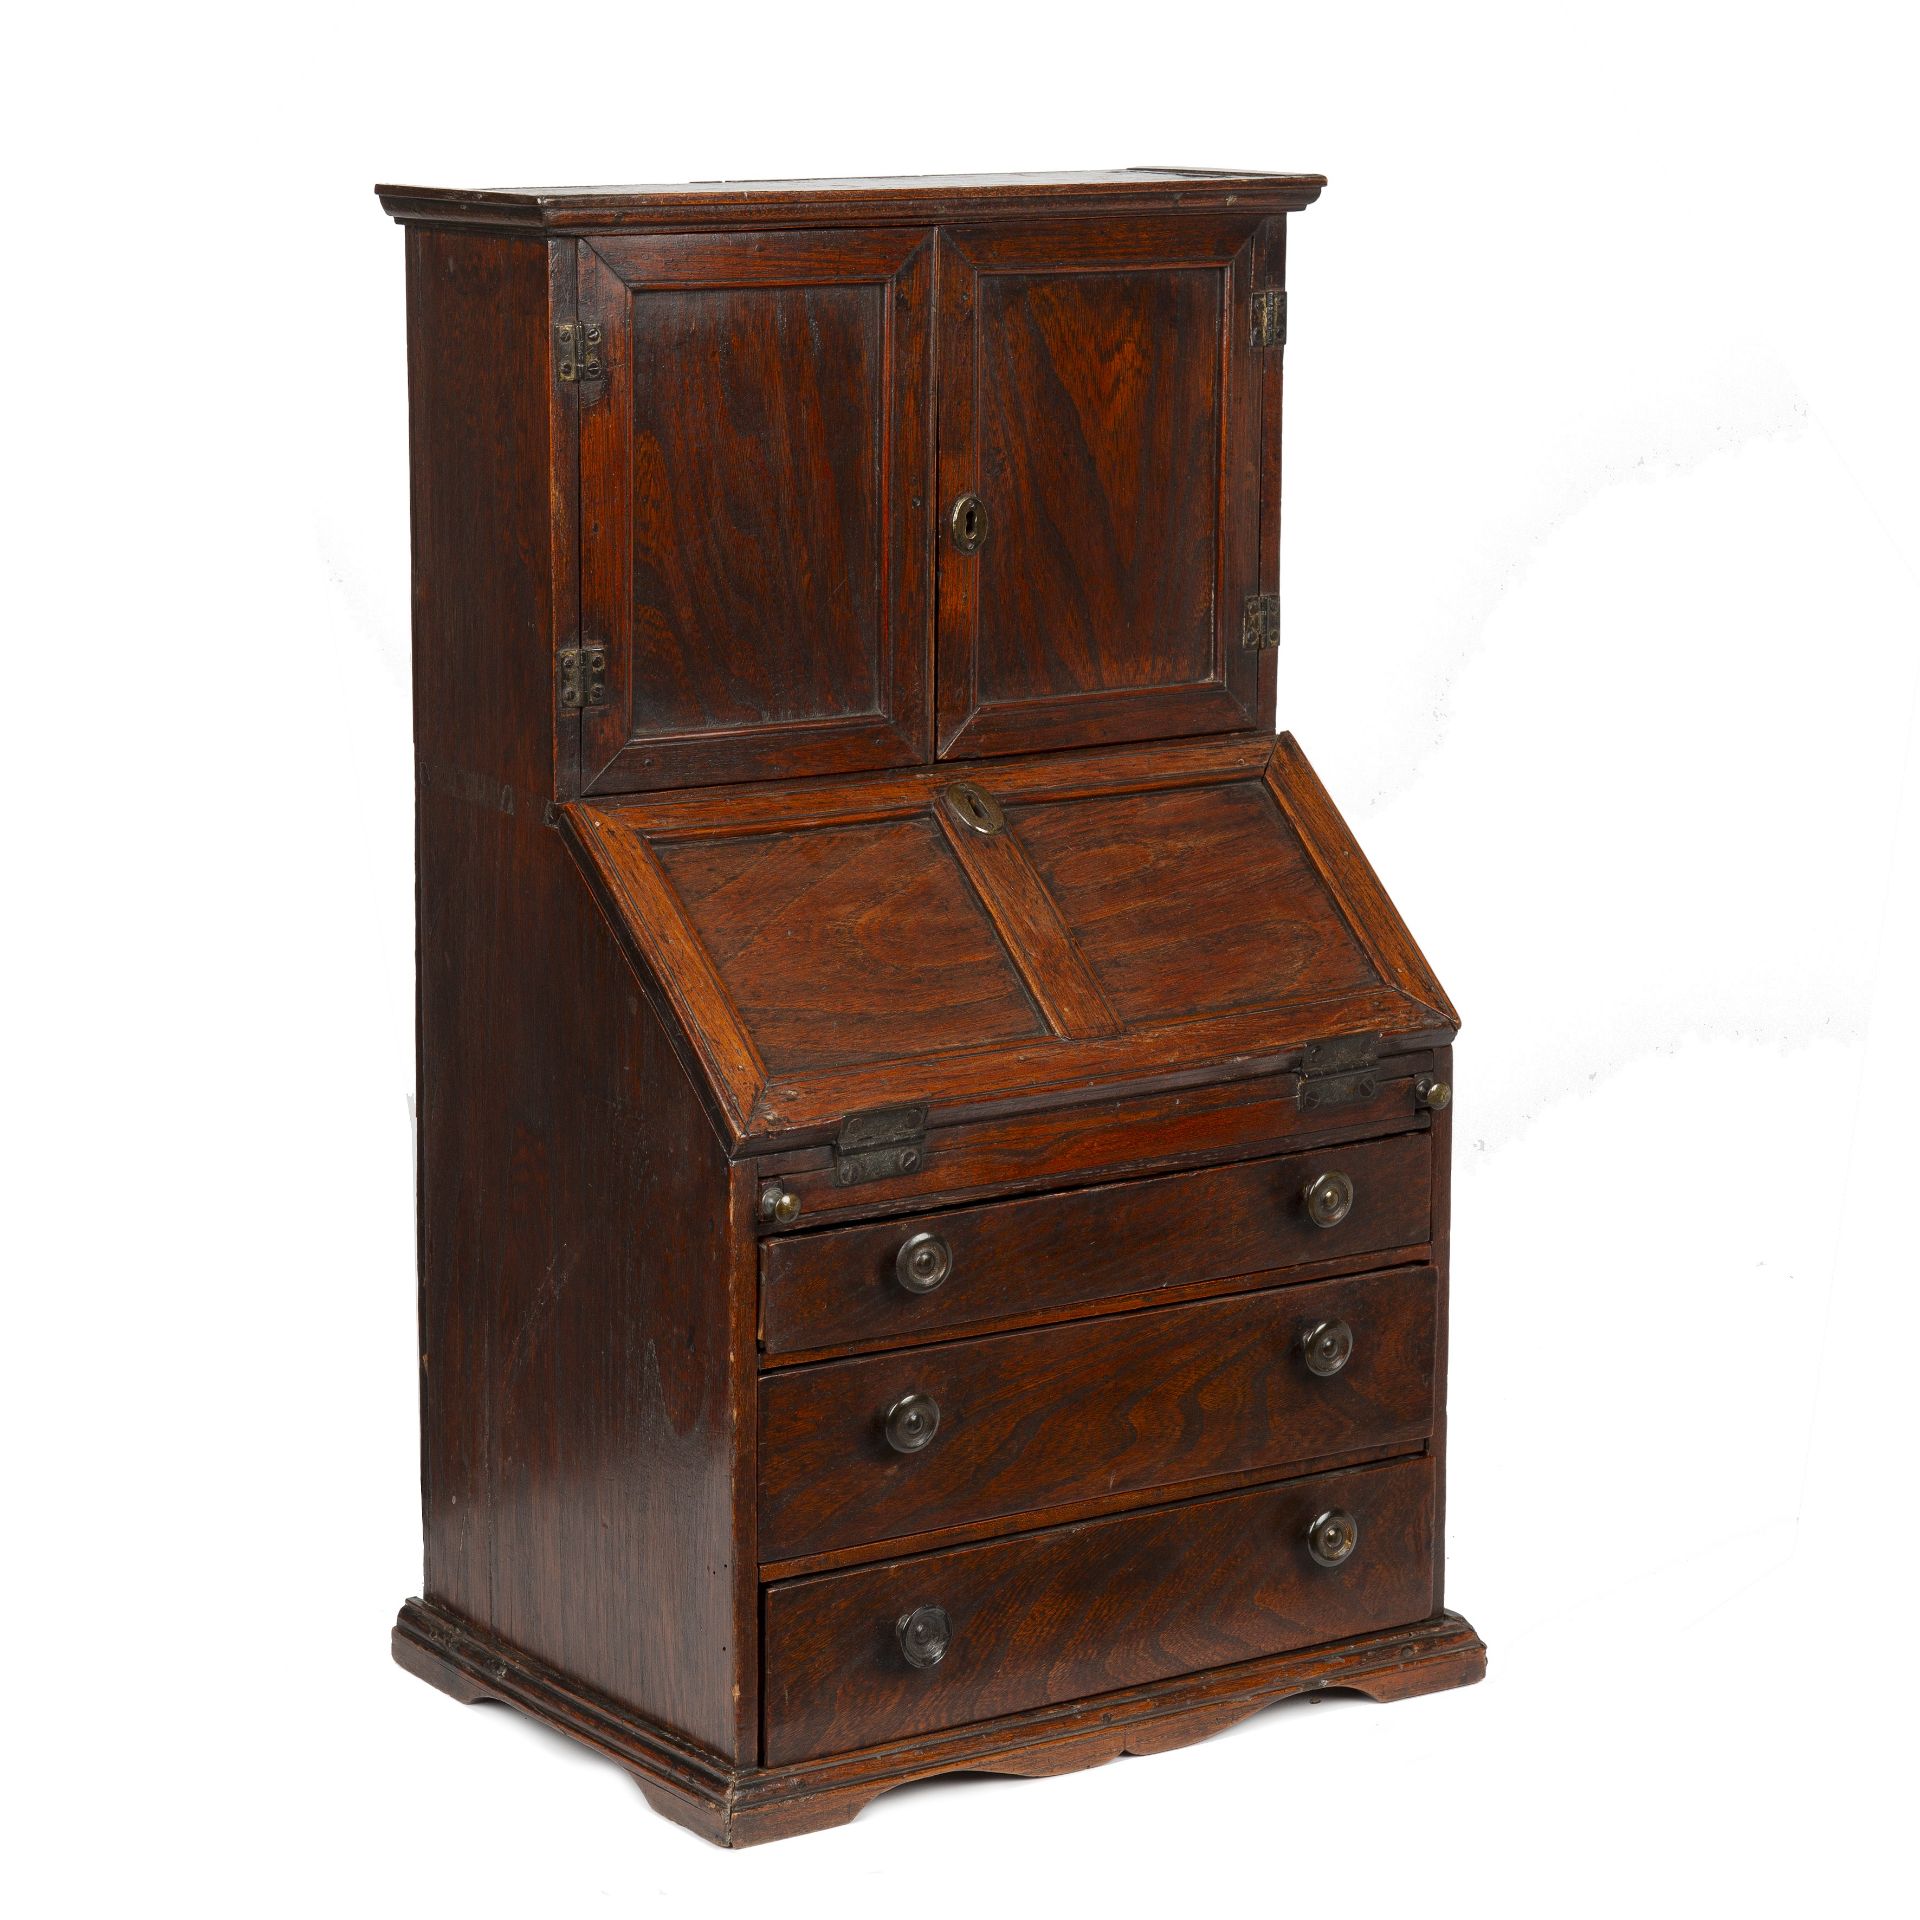 An 18th century elm apprentice bureau bookcase with panelled doors above a fall front three